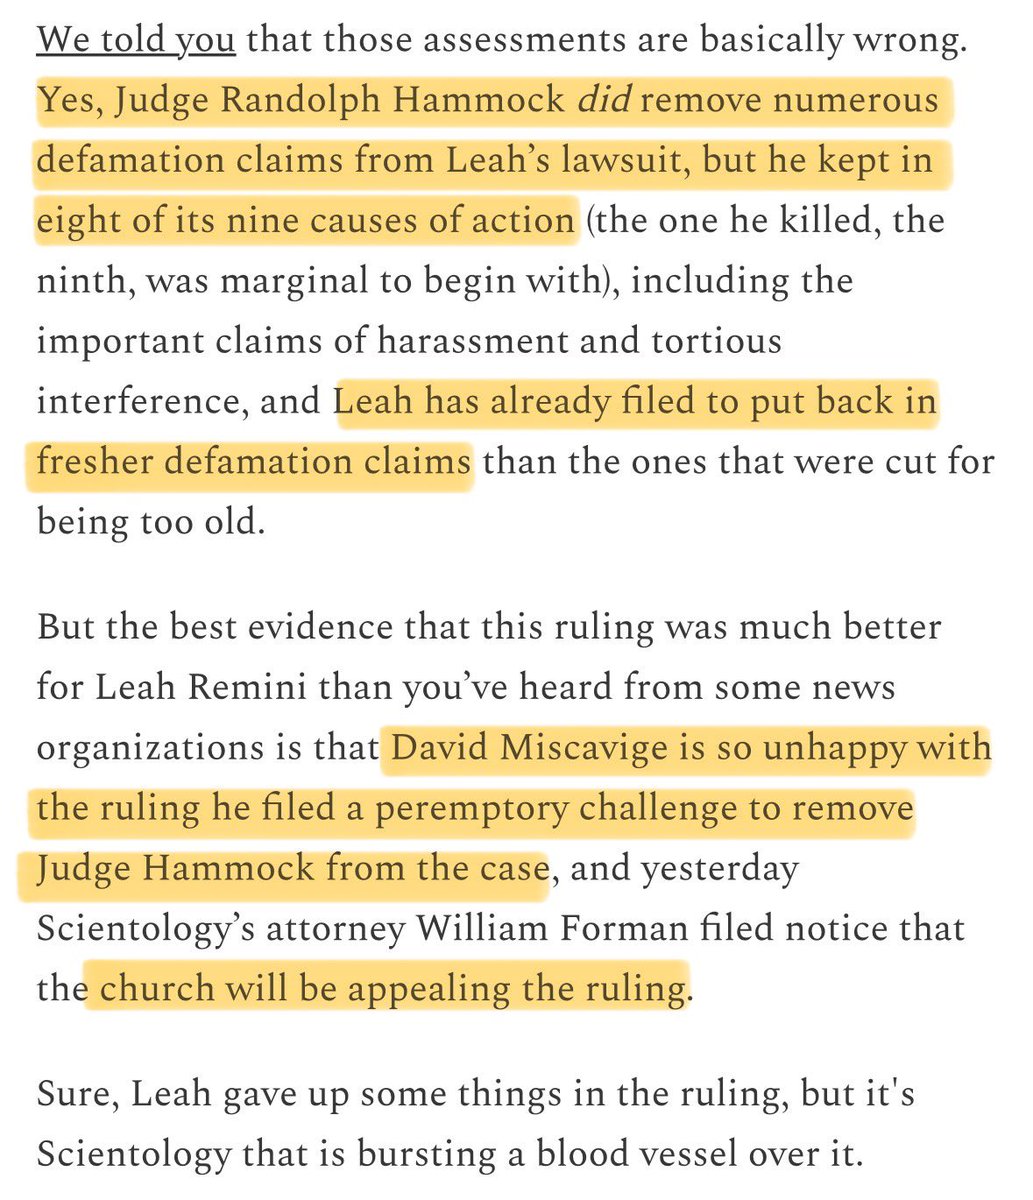 *This remains a problematic lawsuit for Scientology. Pretty amusing to see Karin Pouw, CoS' spokesperson, tell the Courthouse News that this was 'a resounding victory for the Church.' It wasn’t a resounding victory & Scientology has now confirmed that with their plans to appeal.*